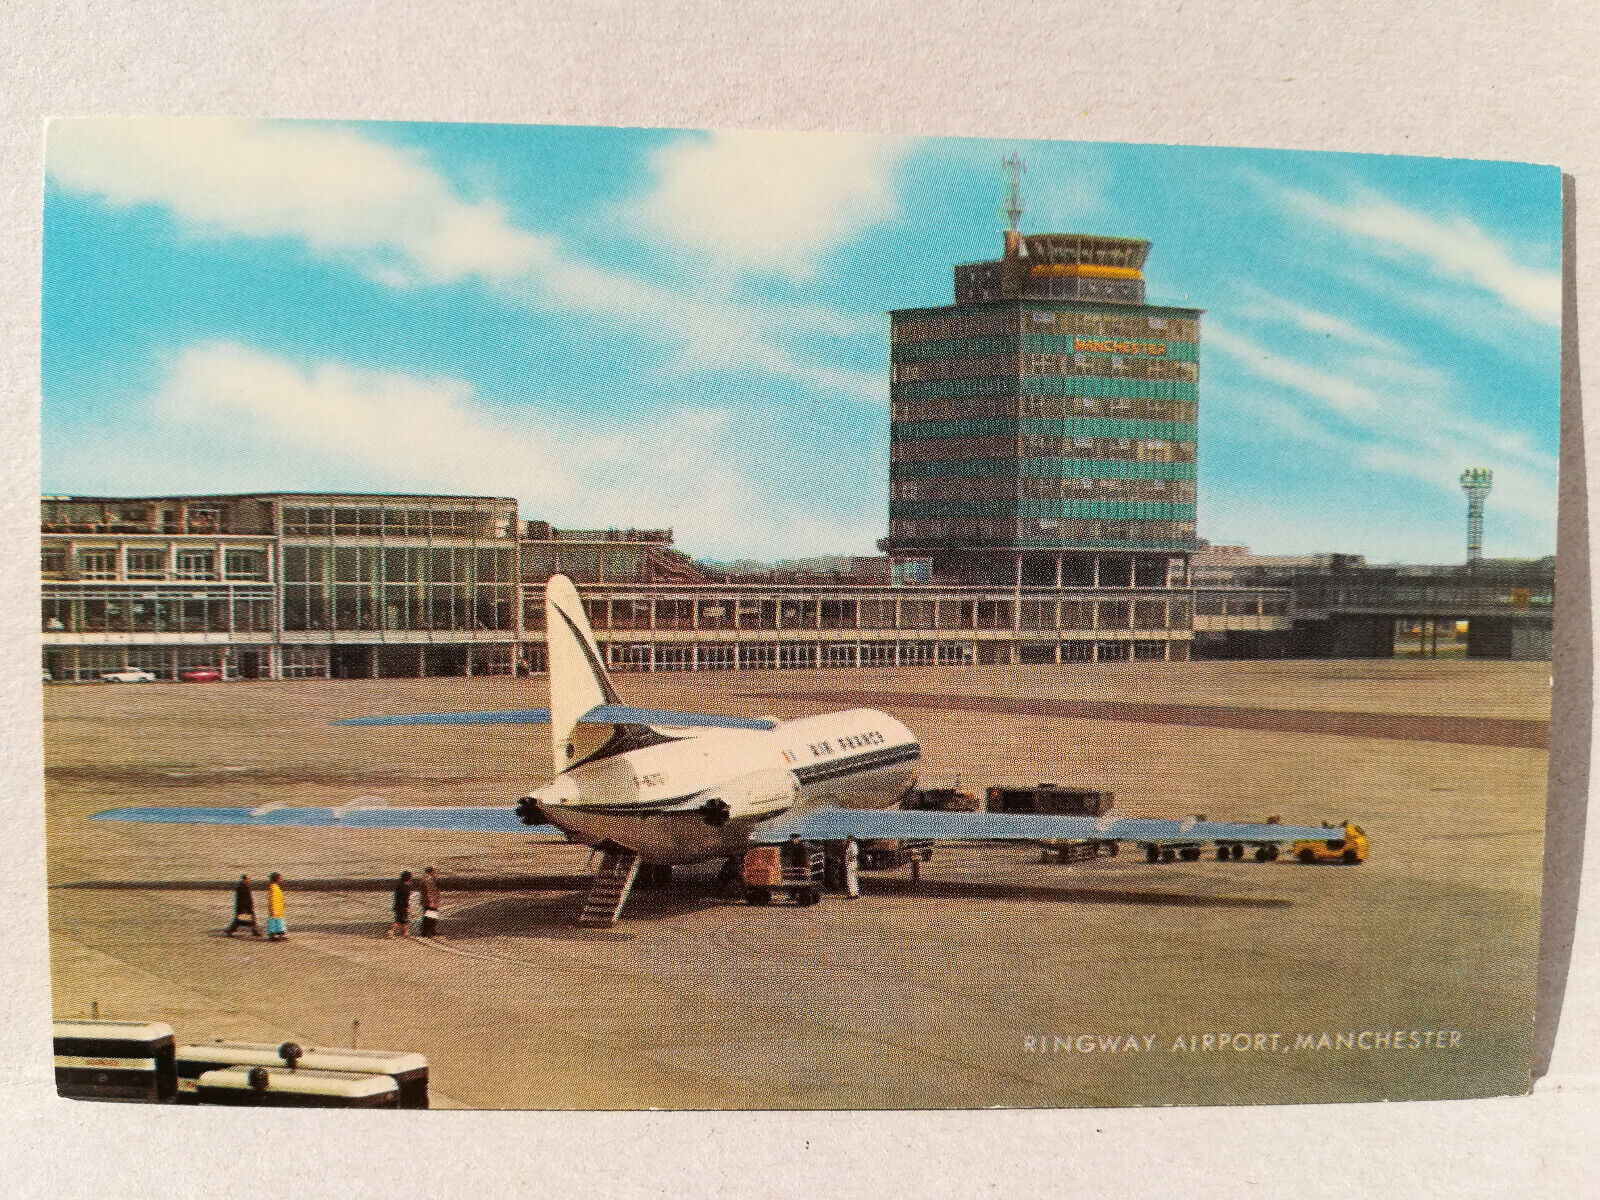 Airport Manchester-UK -AIR FRANCE Caravelle -Aviation Airline Postcard